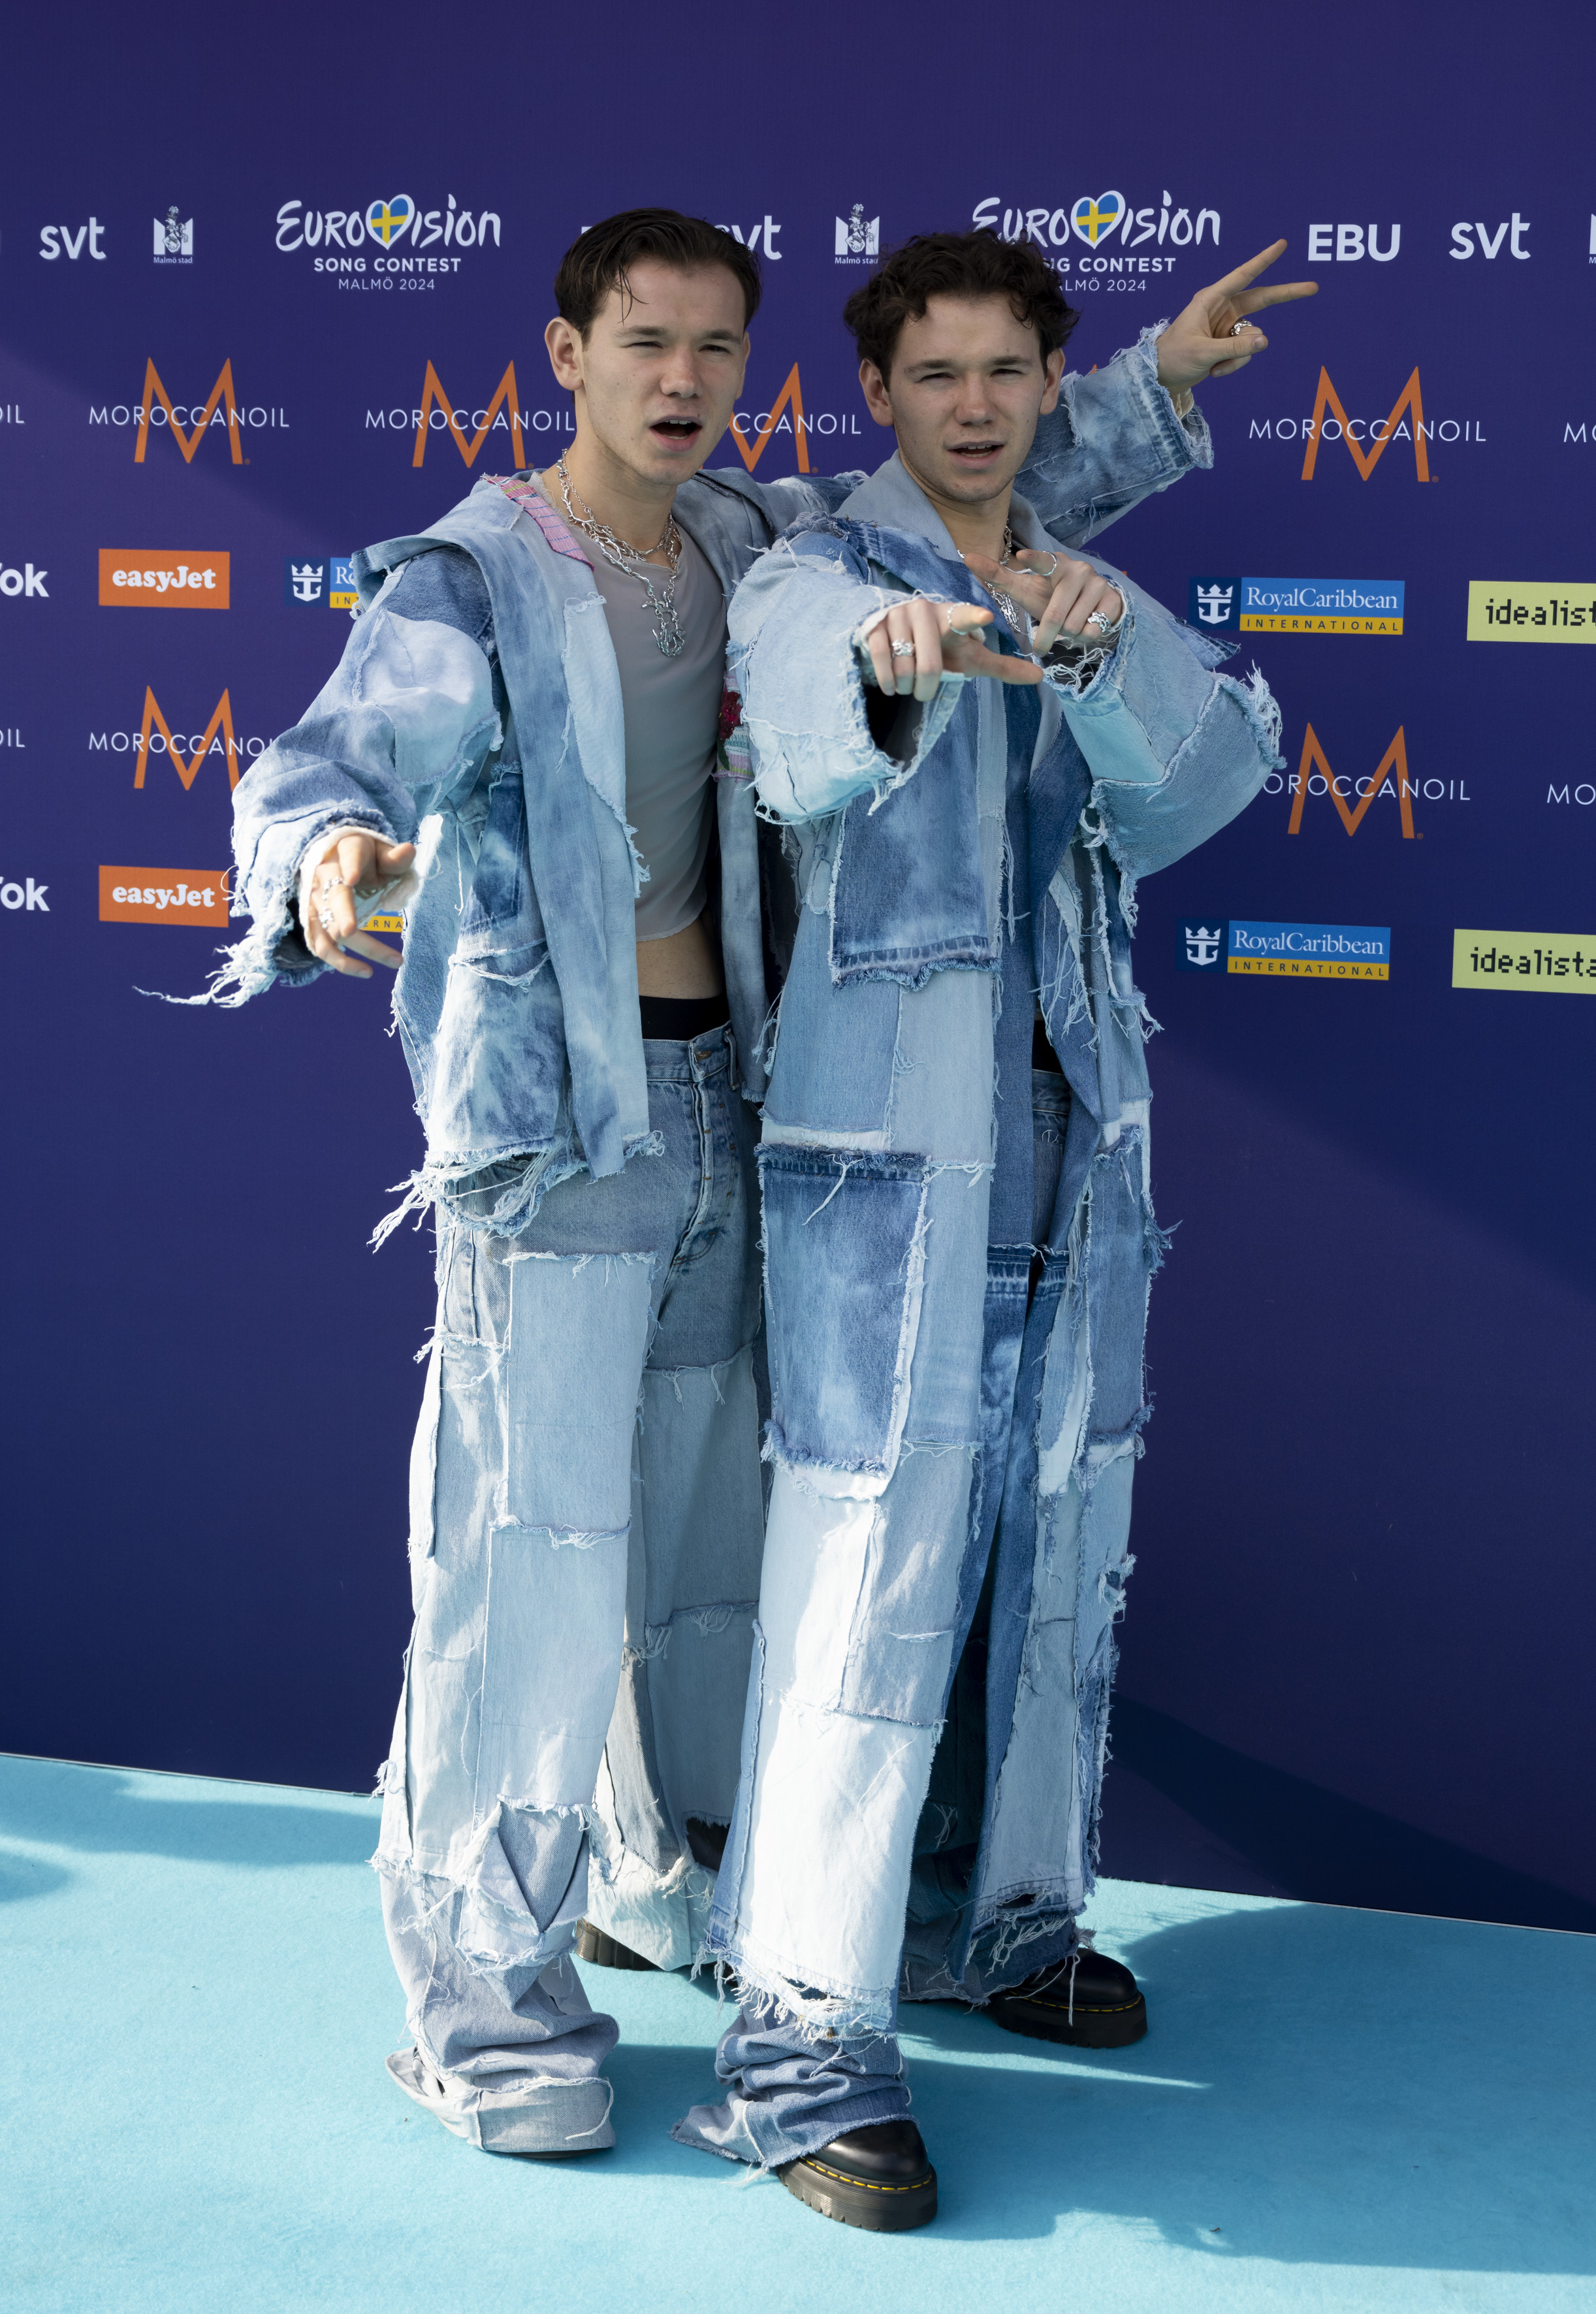 Marcus & Martinus will represent Sweden at the Eurovision with Unforgettable